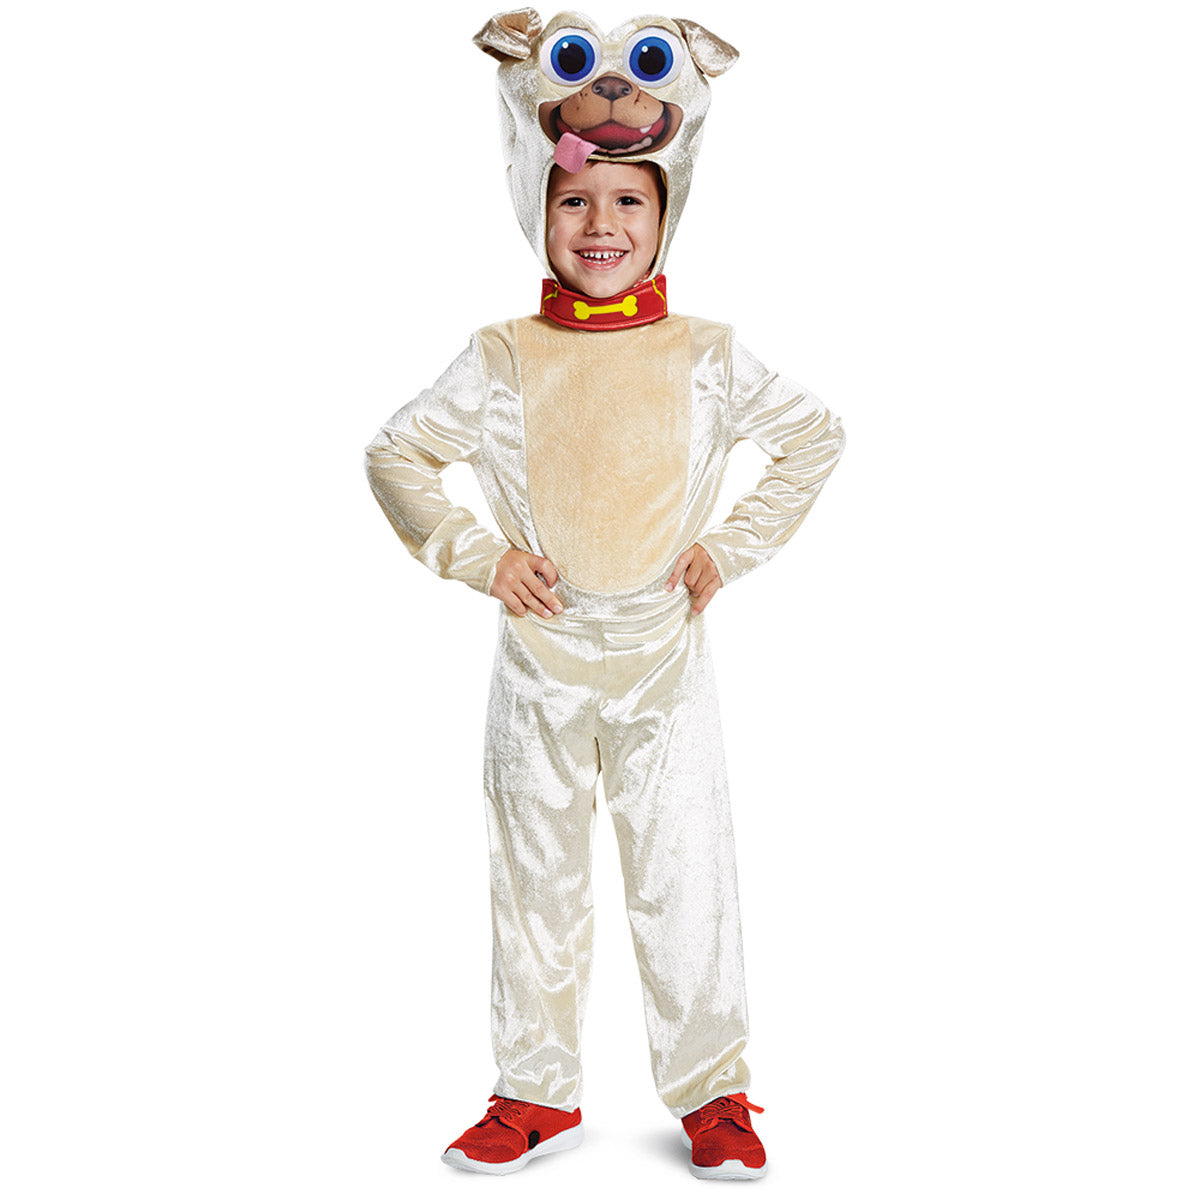 Rolly Classic Toddler Disguise 11833